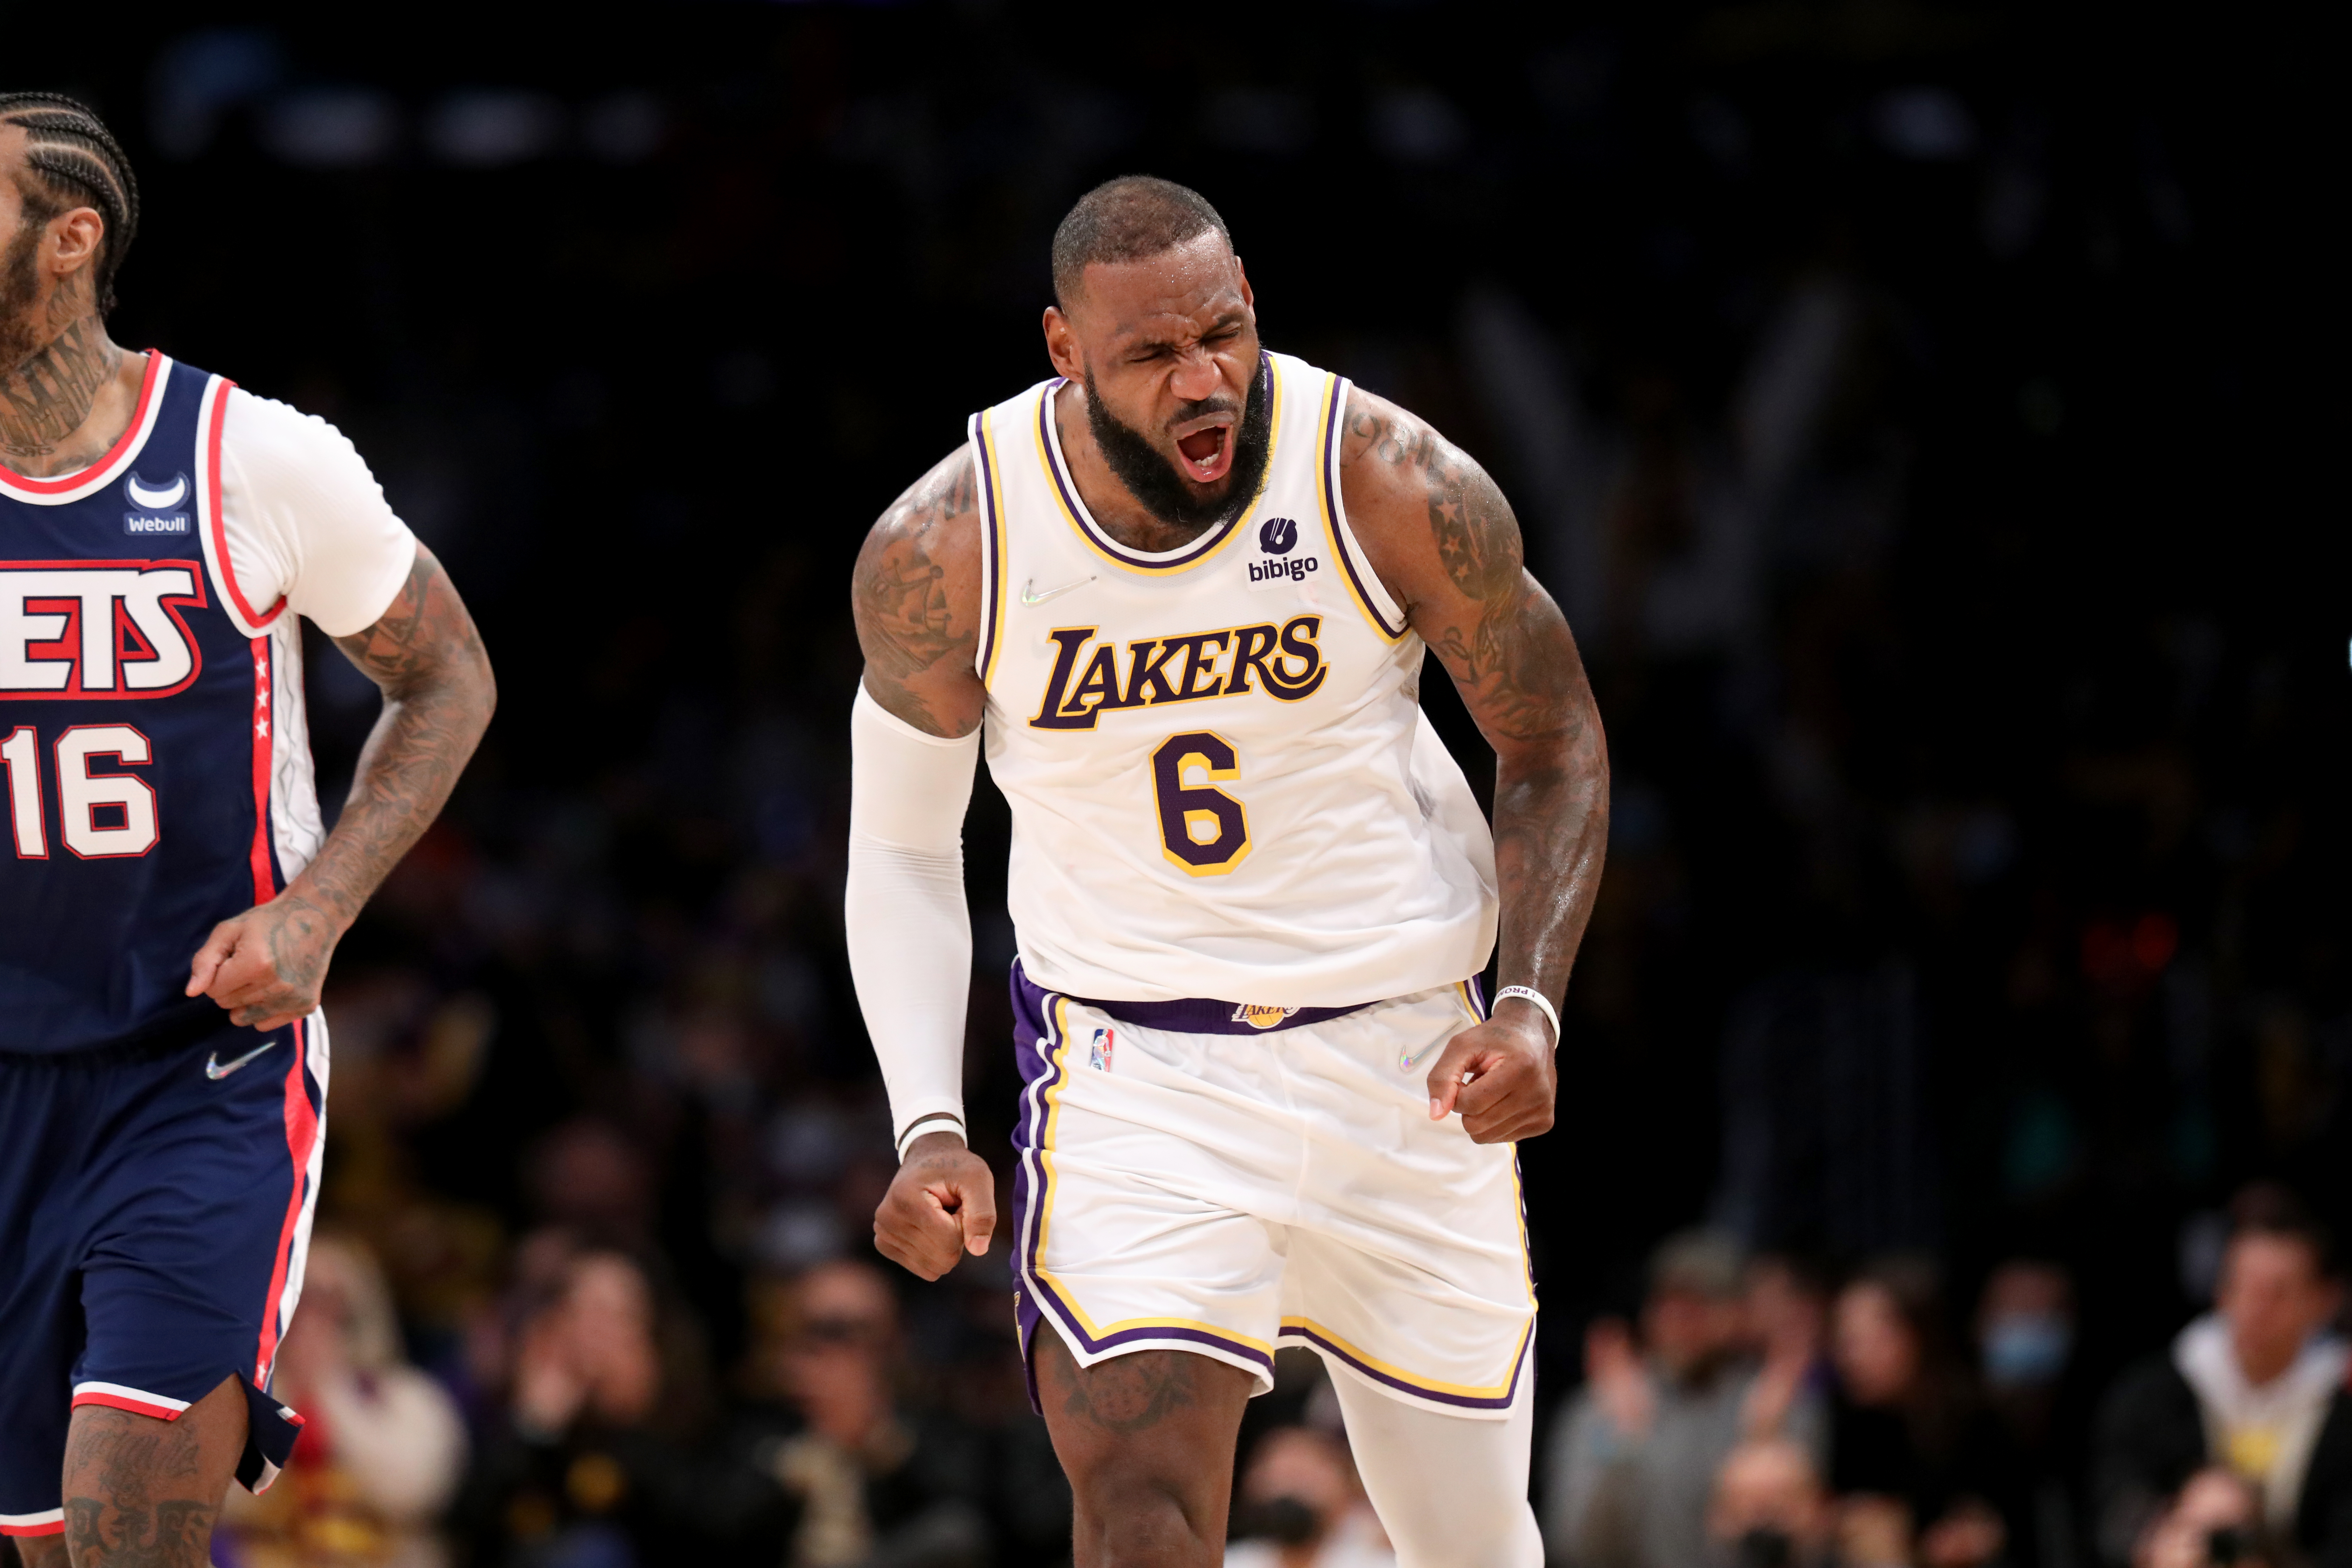 Lakers' LeBron James Becomes 3rd Player All-Time With 36,000 Career Points thumbnail